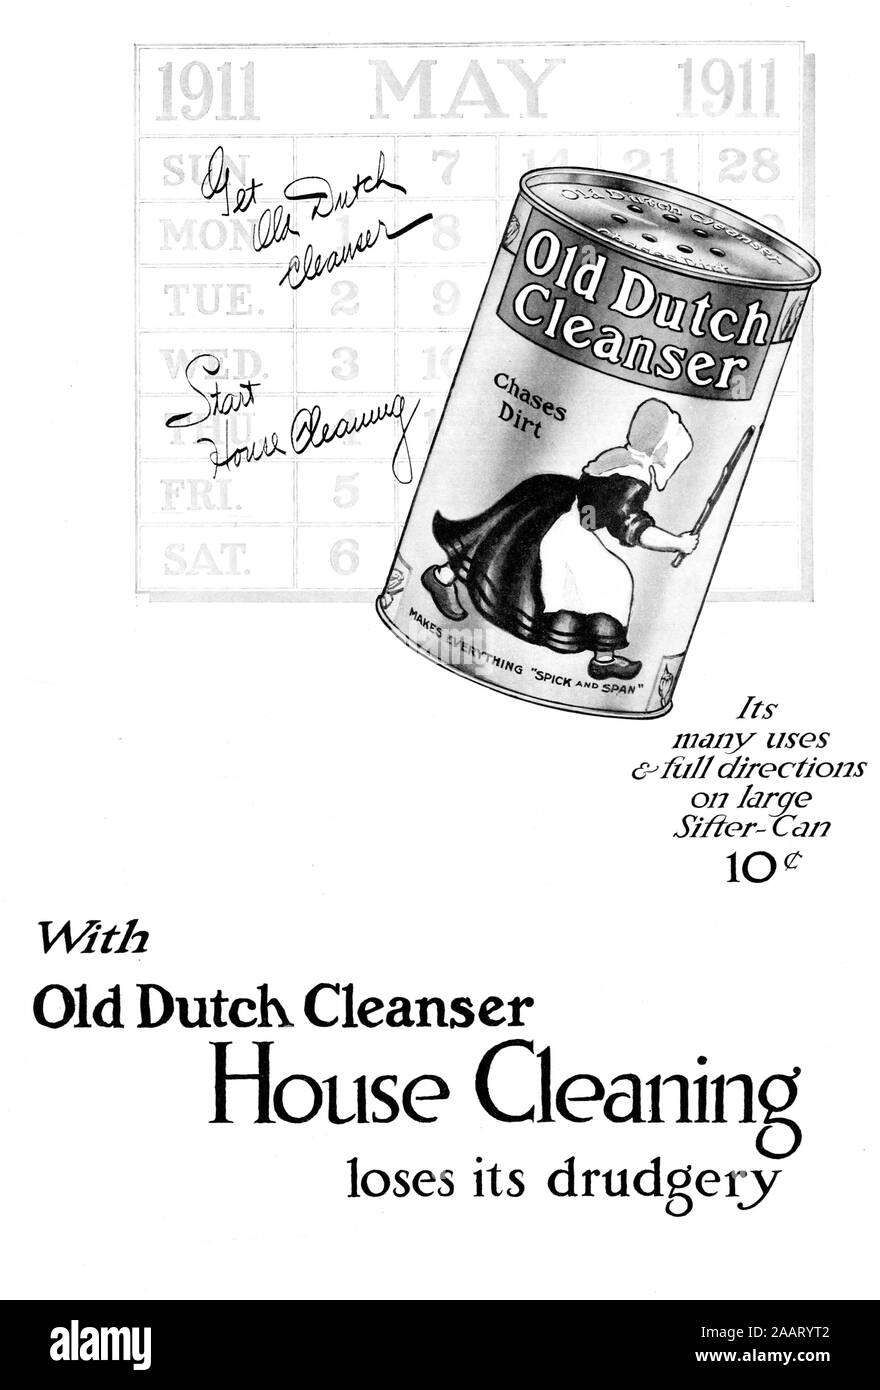 'With Old Dutch Cleanser House Cleaning Looses its drudgery' - cleaning advertisement taken from 1911 magazine Stock Photo